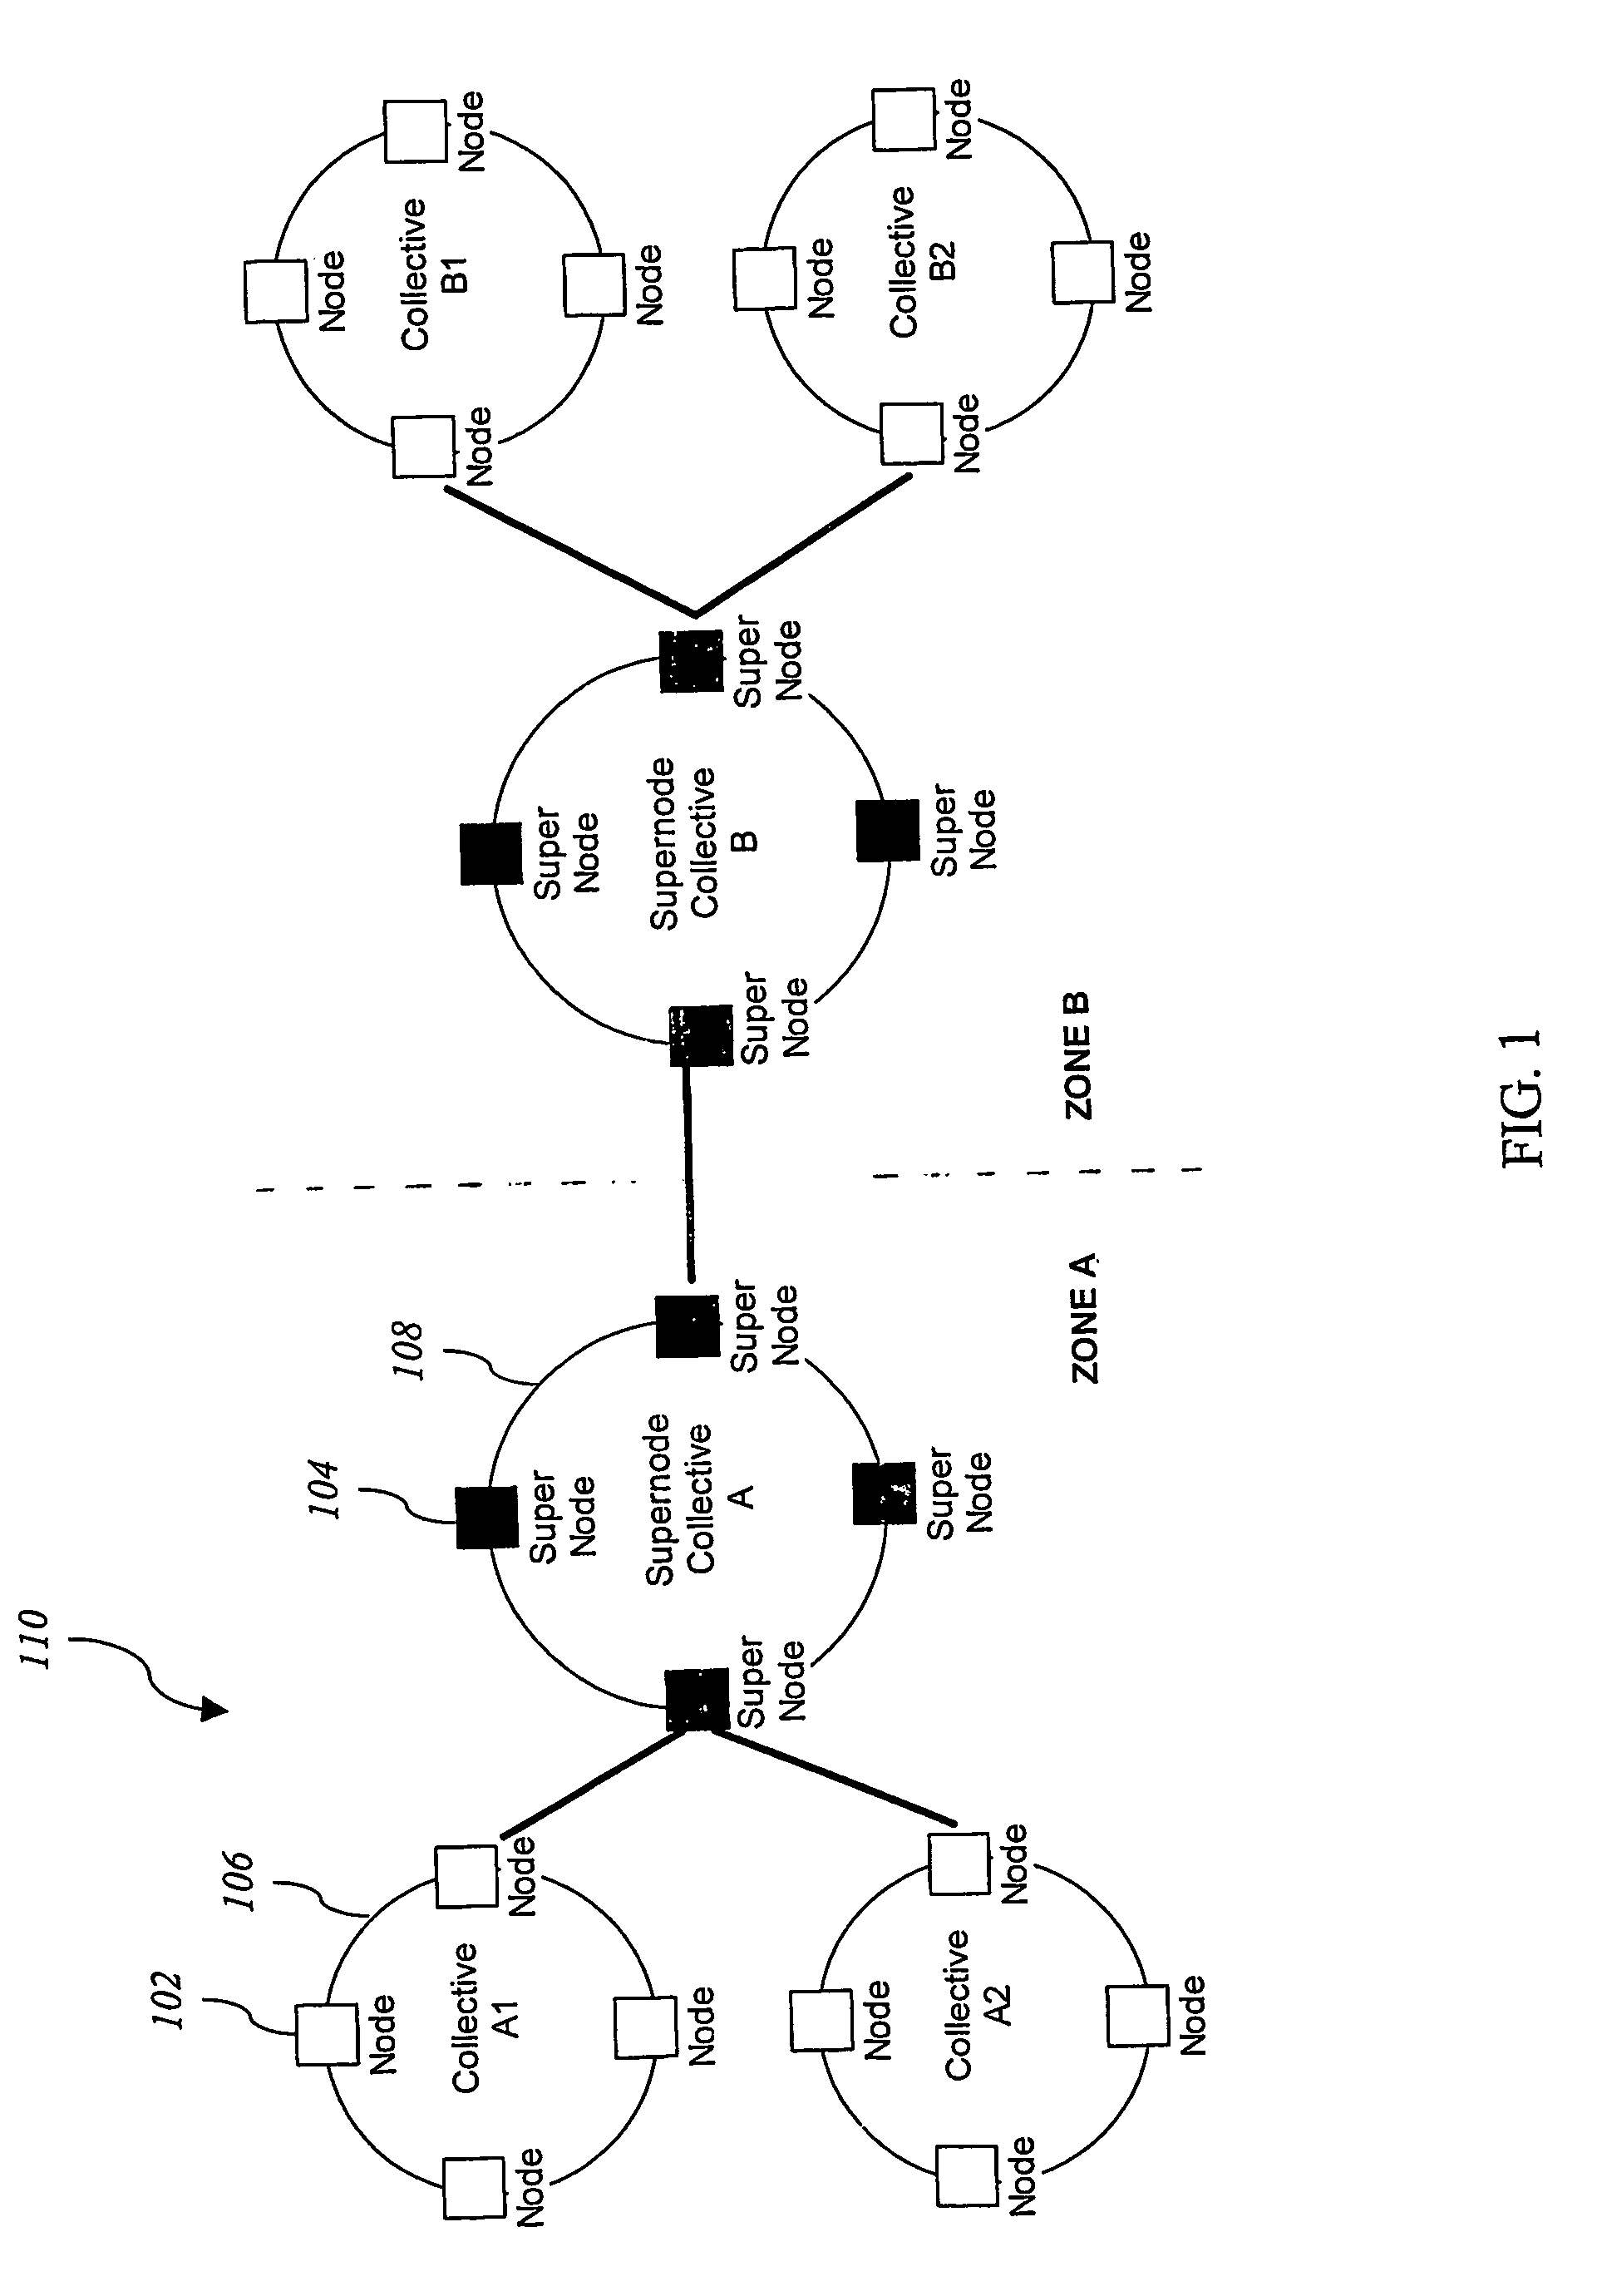 Systems and methods for enhanced network security